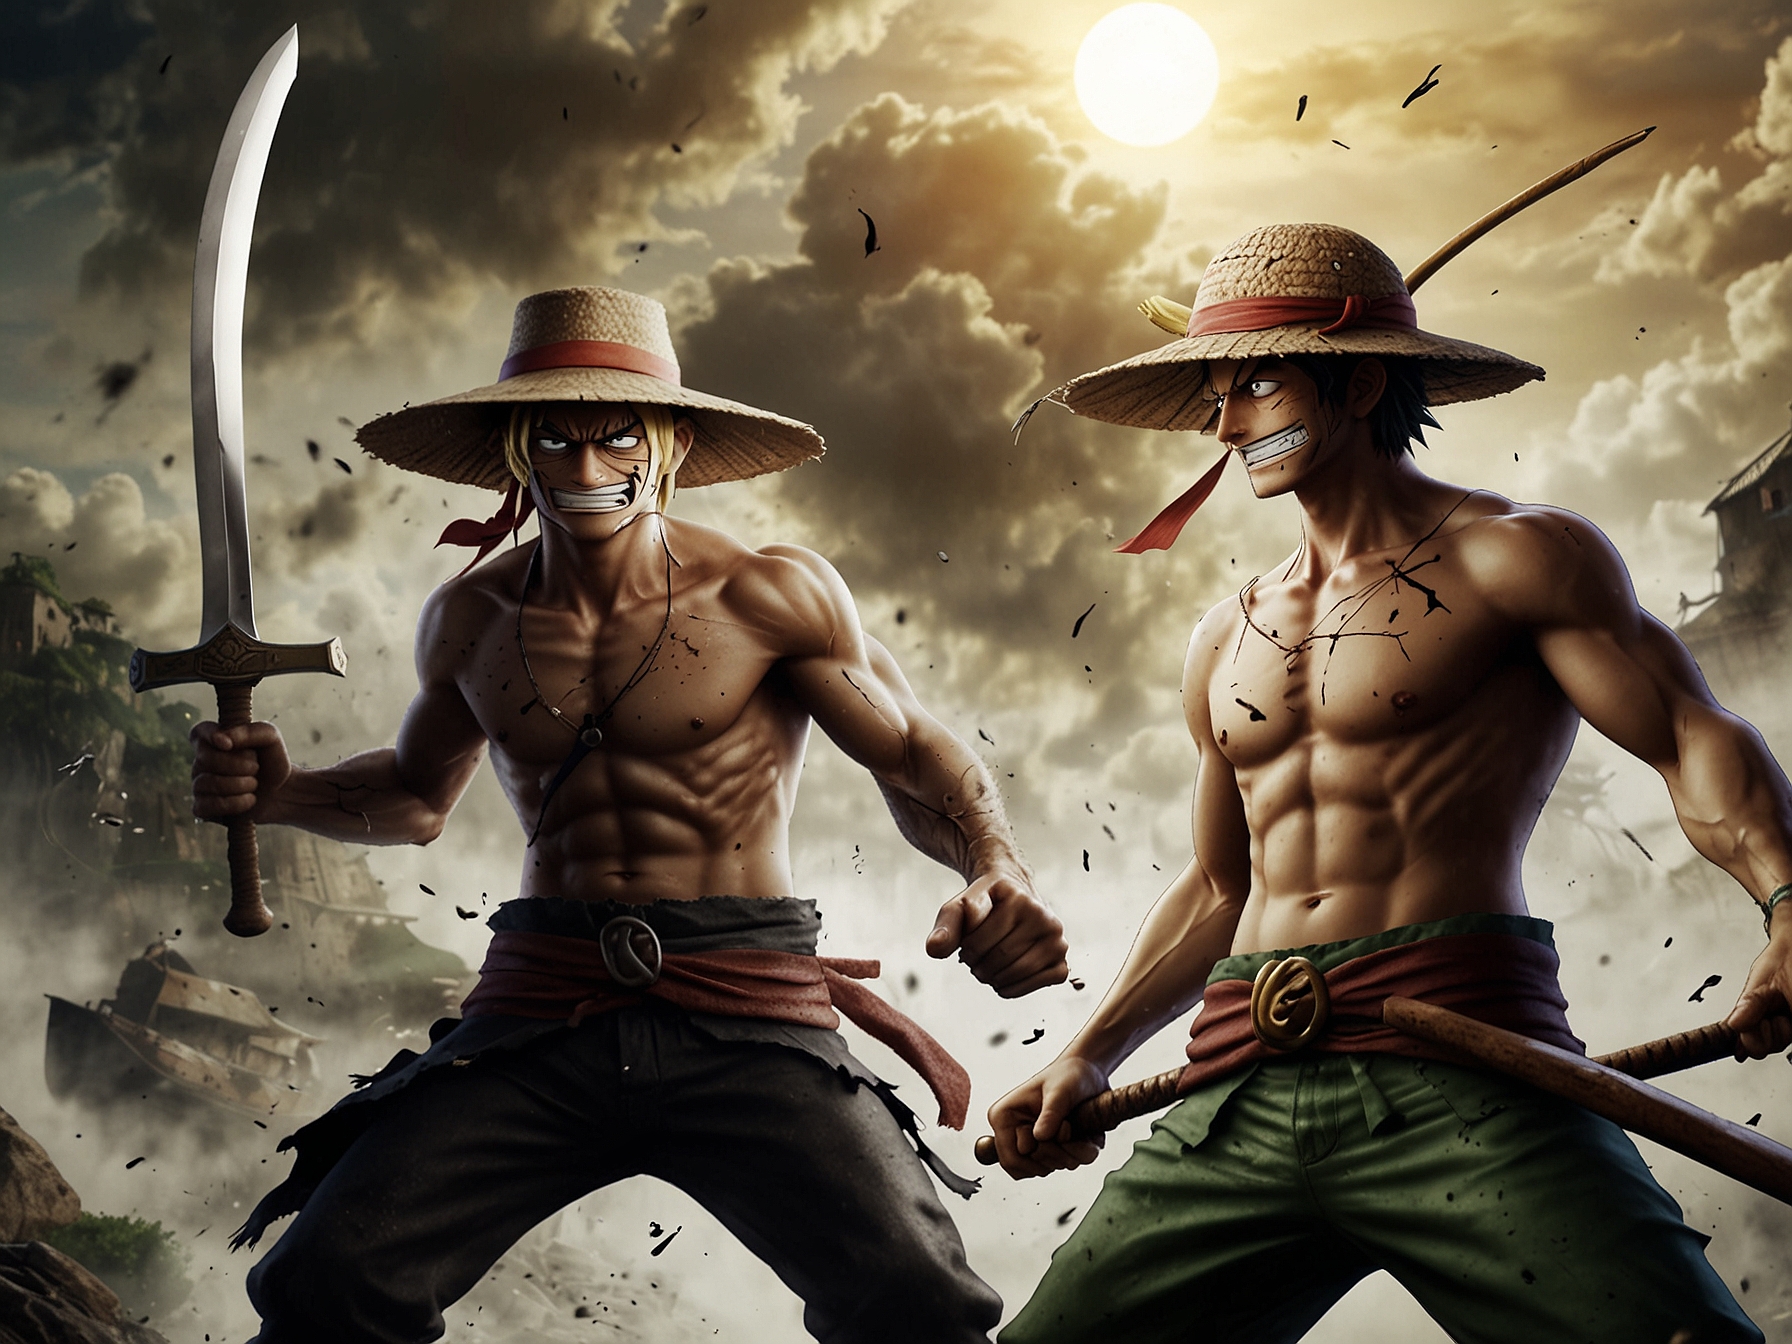 As Luffy and the Gorosei clash, Zoro engages in a fierce duel with an opponent wielding a cursed sword, while Sanji uses his Raid Suit in sky-bound combat. The action-packed scenes showcase the diverse fighting styles of the Straw Hat Pirates.